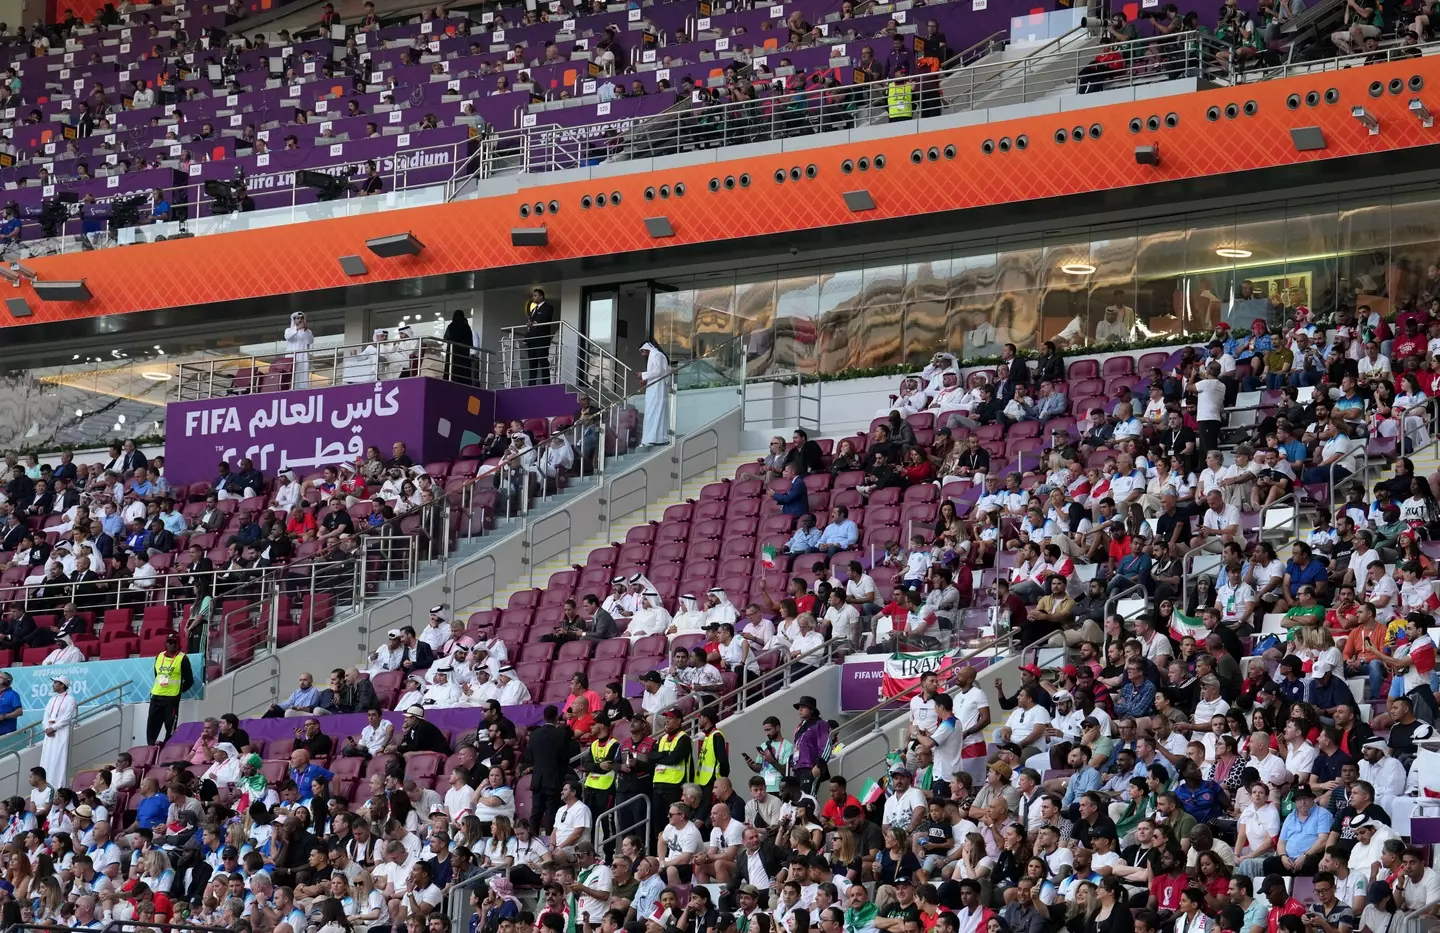 Empty seats in the stands during the Group B match between England and Iran at the Khalifa International Stadium. Image credit: Alamy